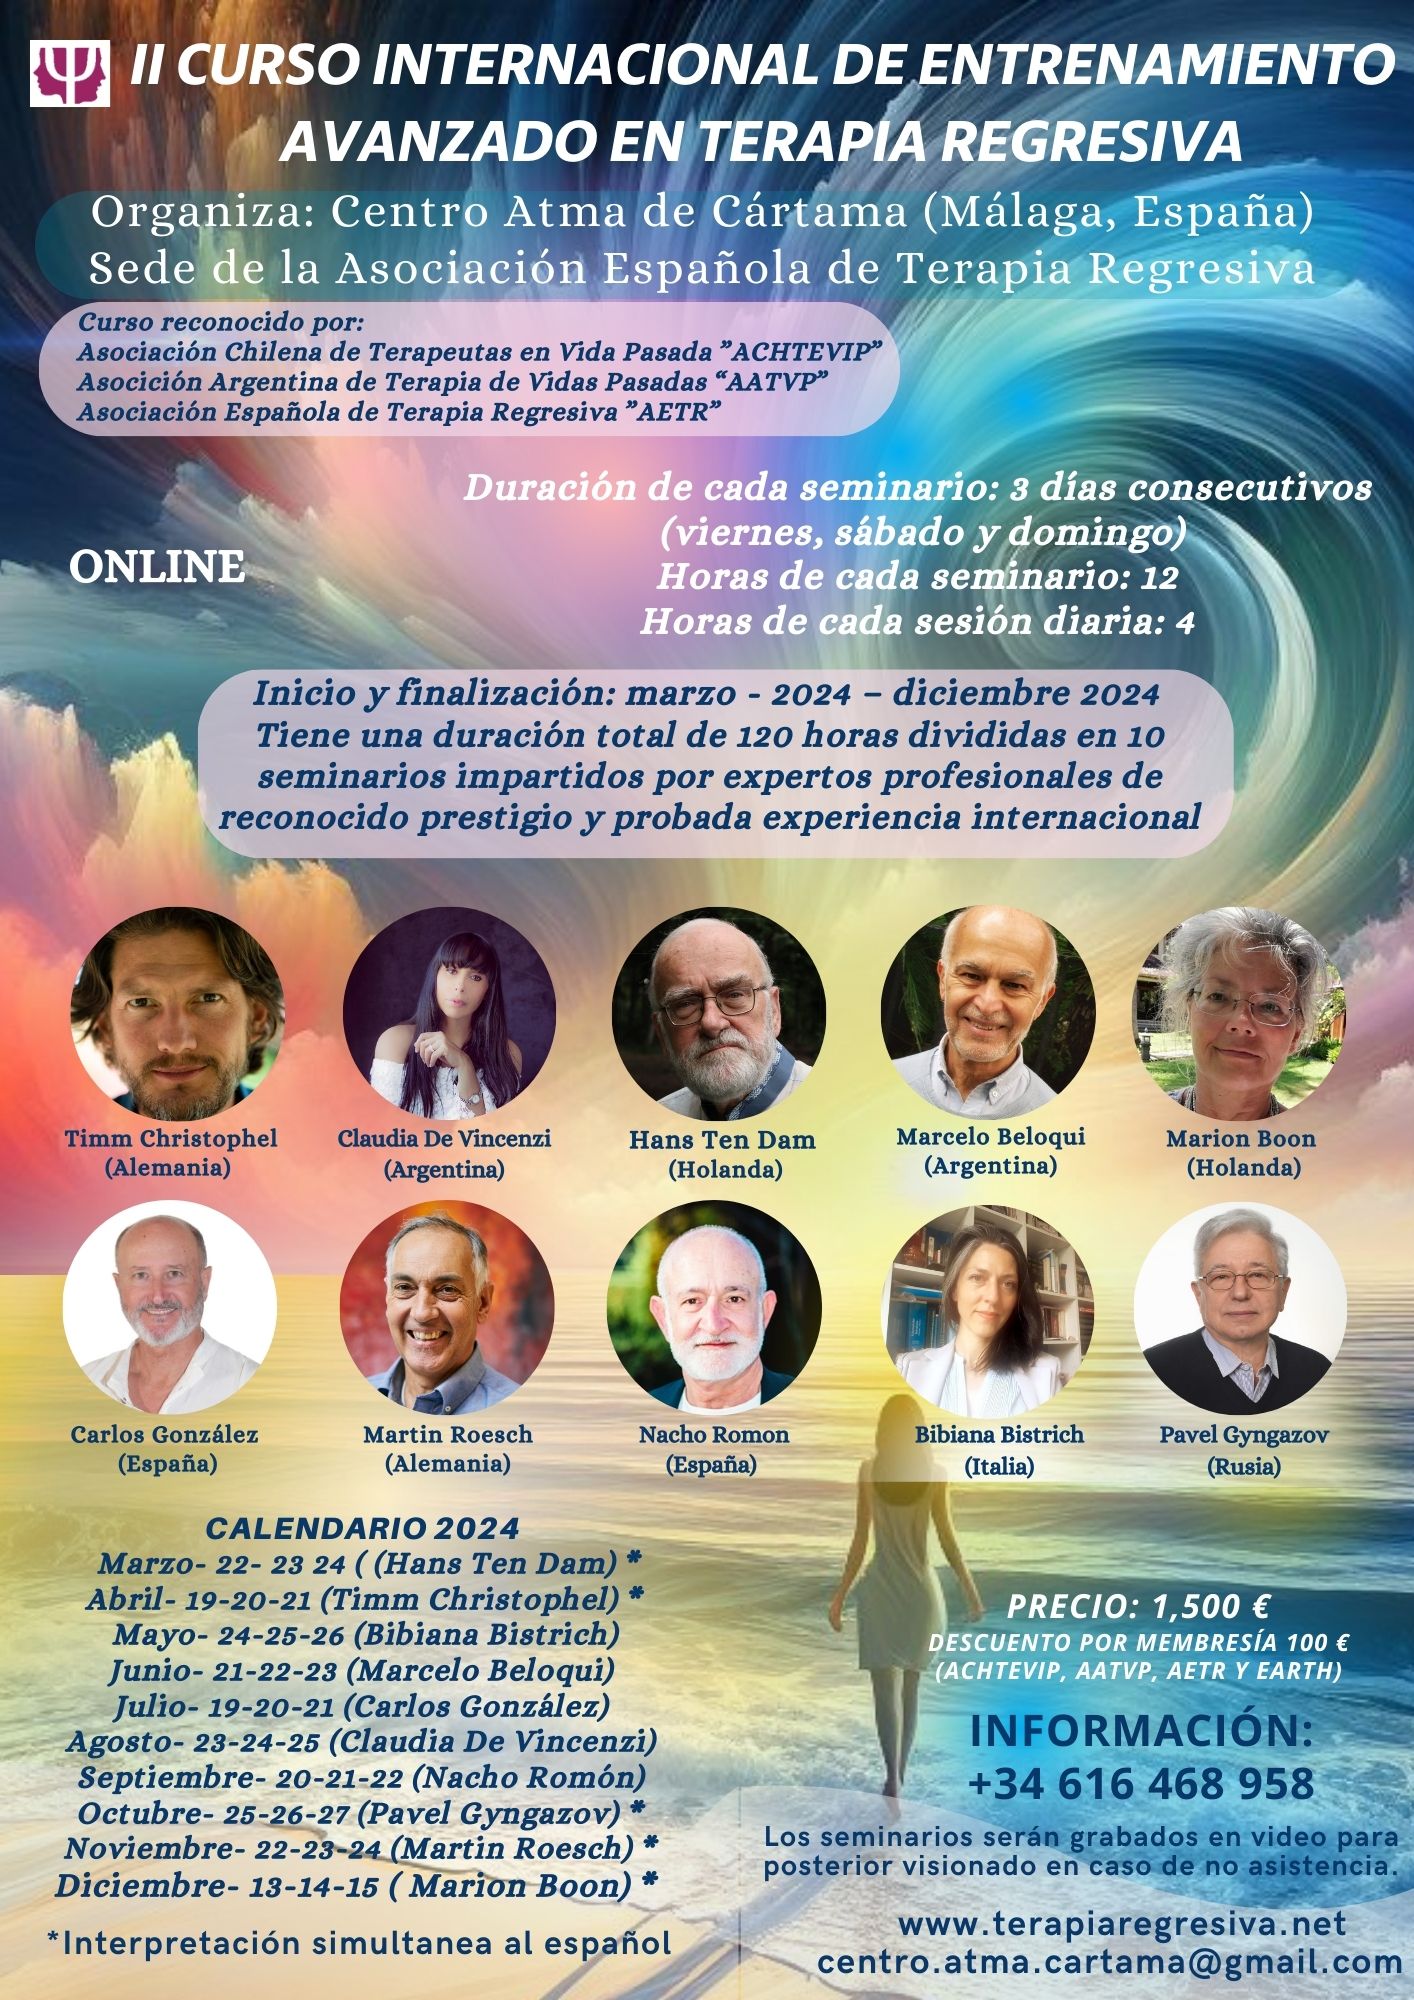 Second international course of advanced training in regression therapy - 2024.